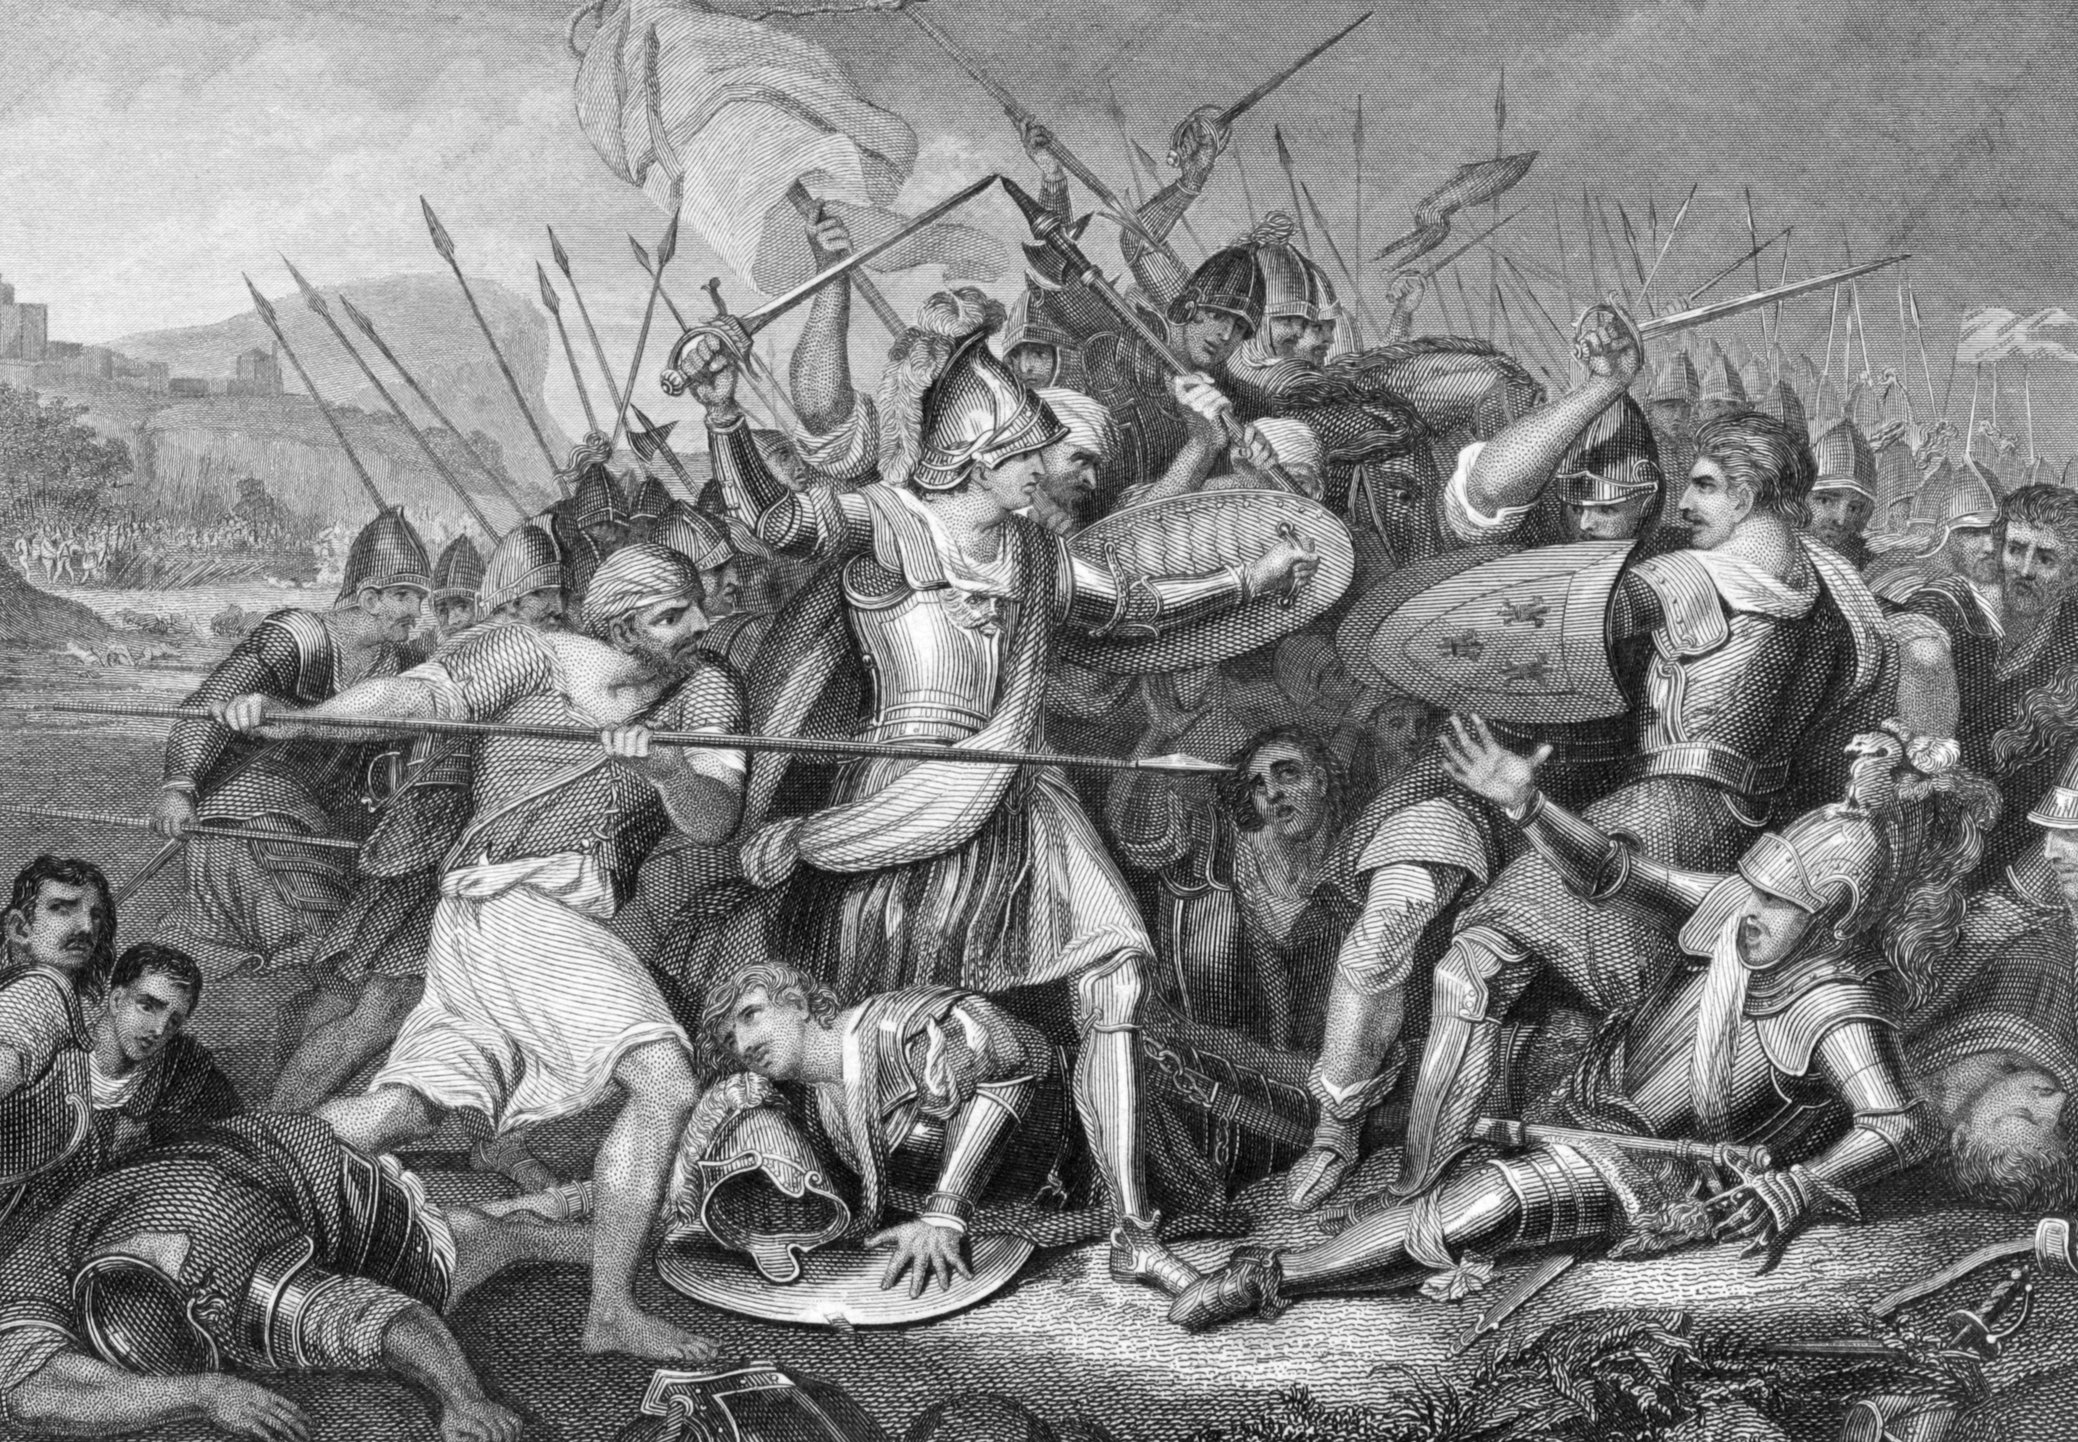 Lessons learned from Battle of Agincourt for business leadership.